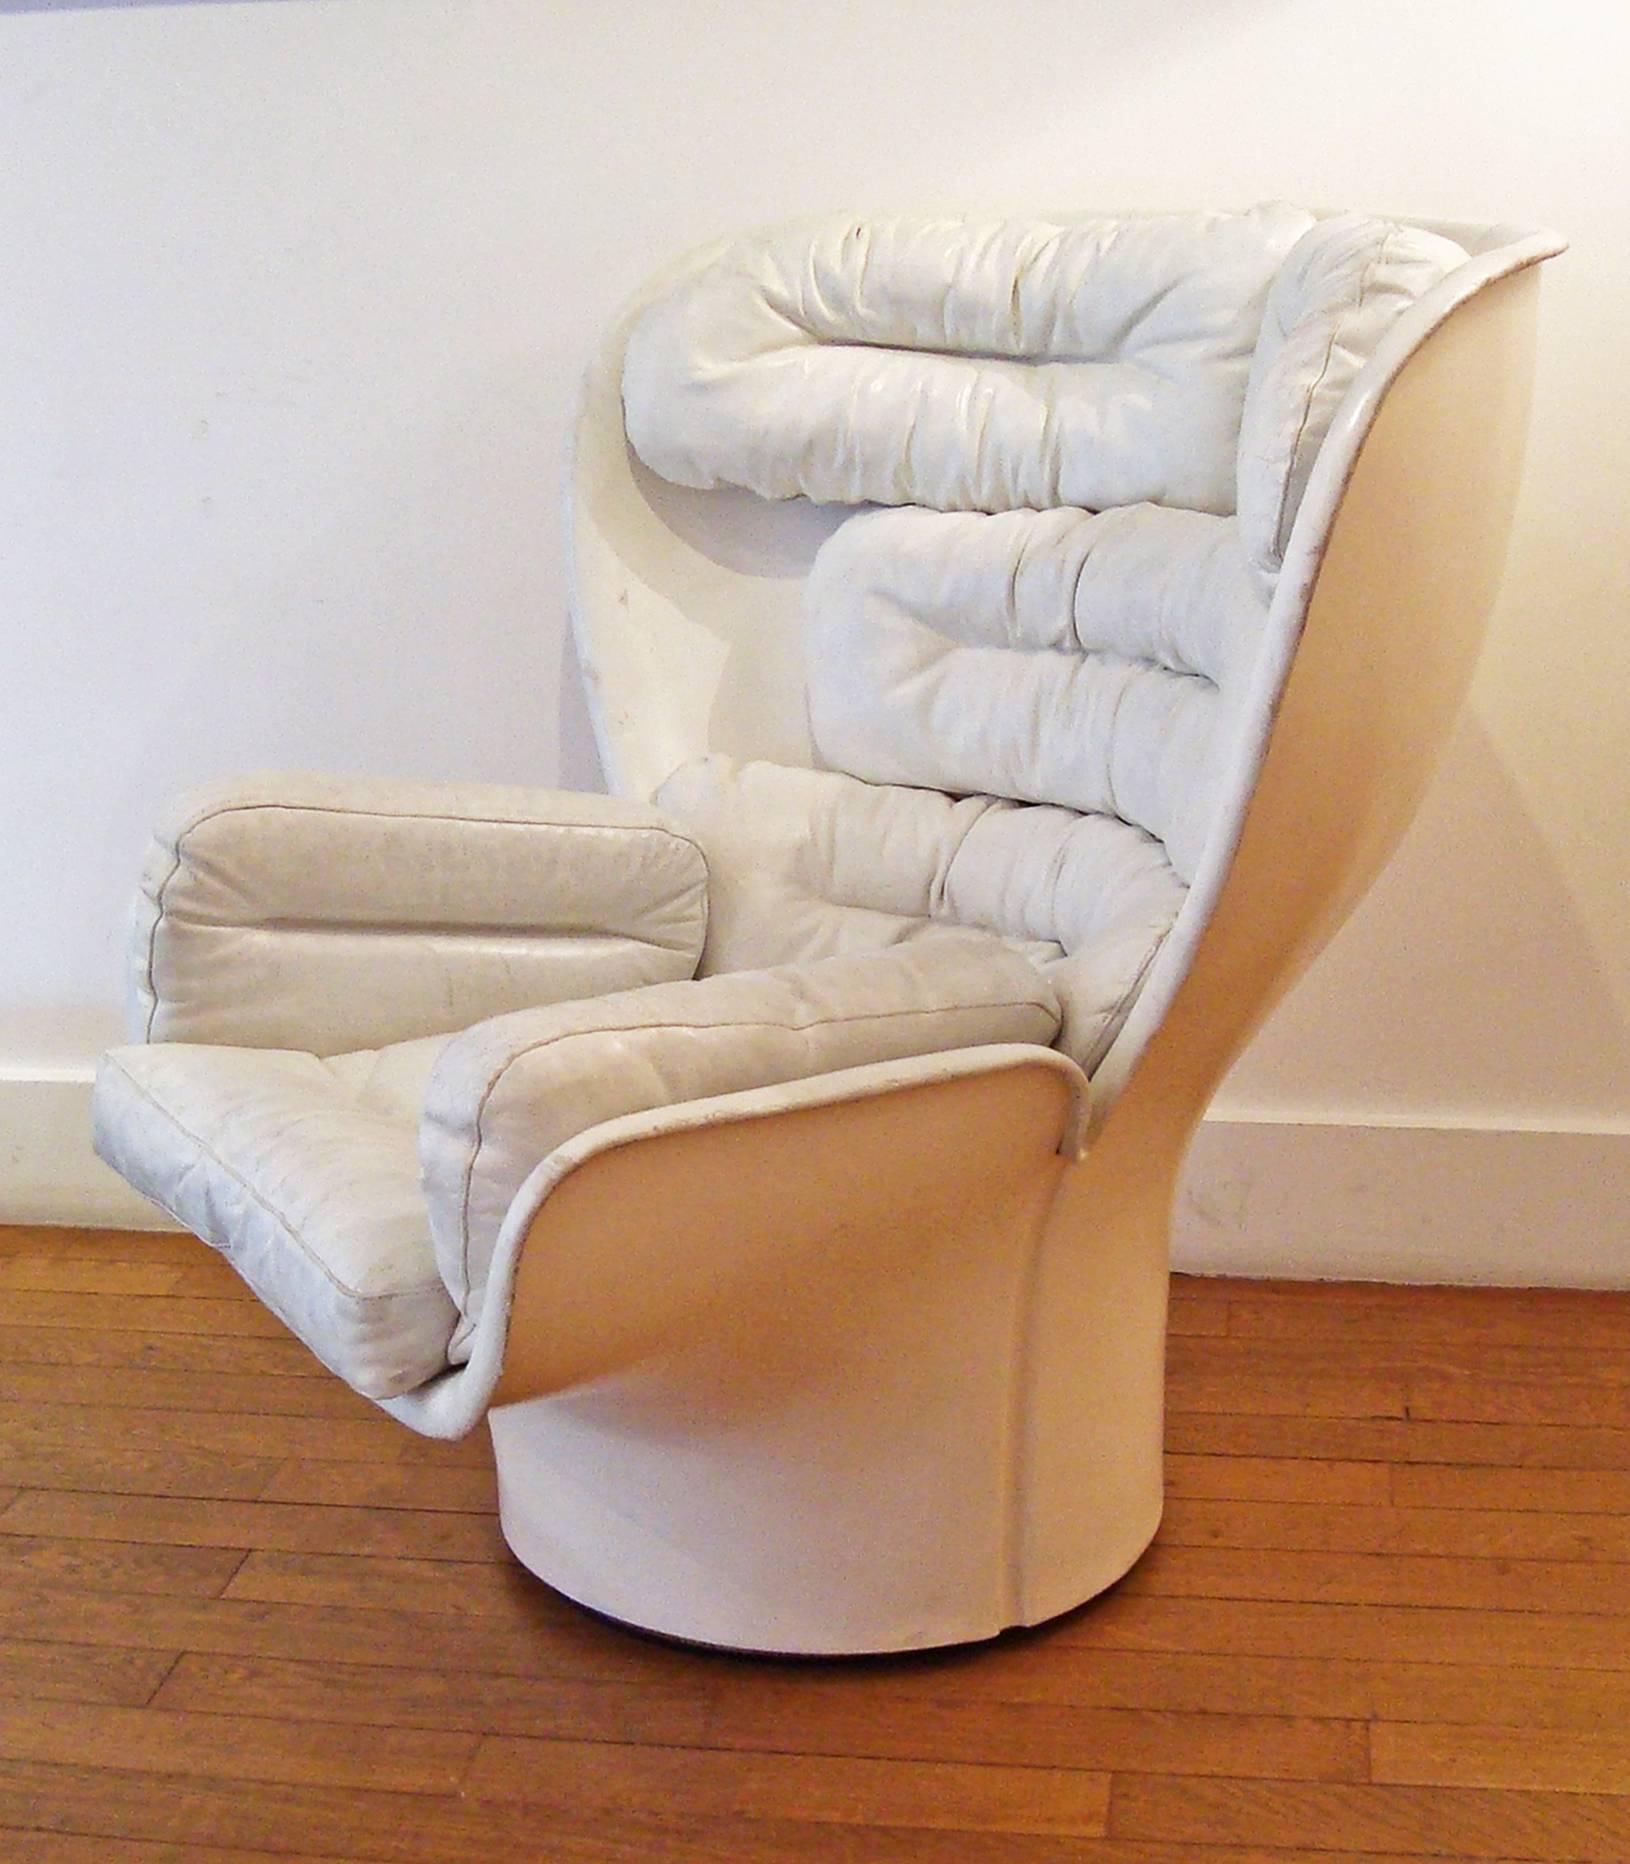 Elda 1005 armchair, 1963, by Joe Colombo, Italy (1930-1971).
Large swivelling white armchair with leather cushions- Original hooks to hold them. Polyester and molded fiberglass base.
Comfort Edition F.L.Longhi, Milan. Good vintage